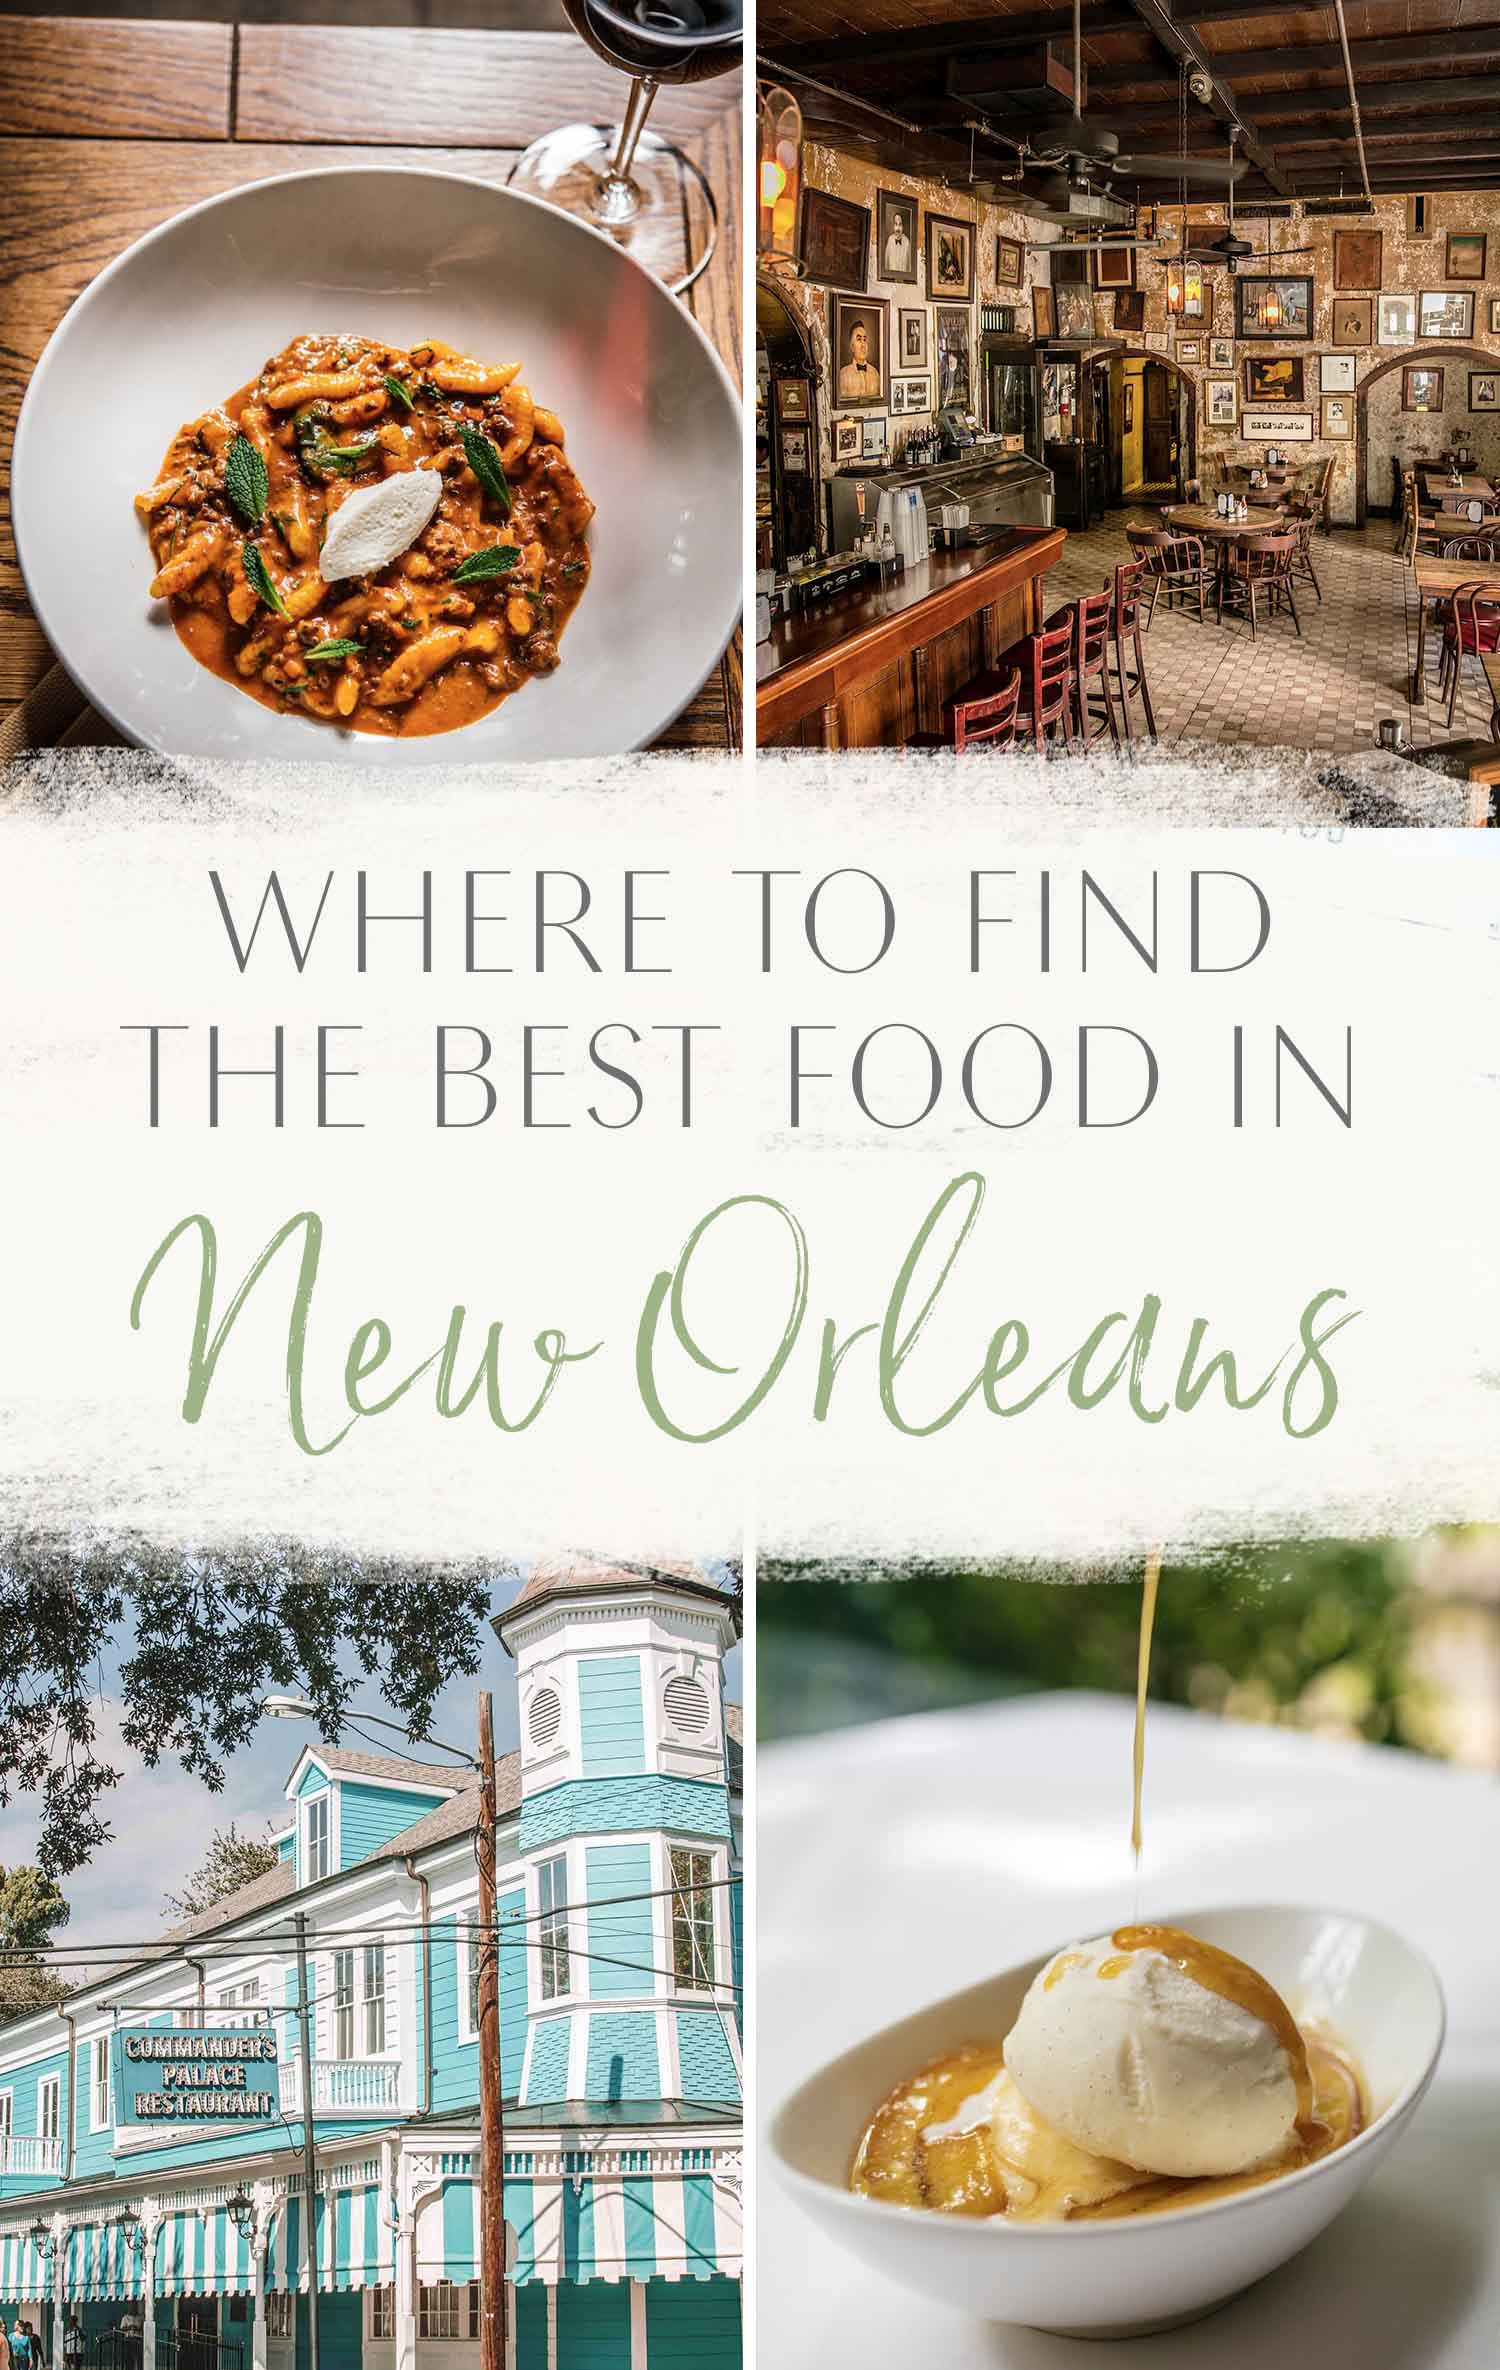 Where to Find the Best food in new orleans